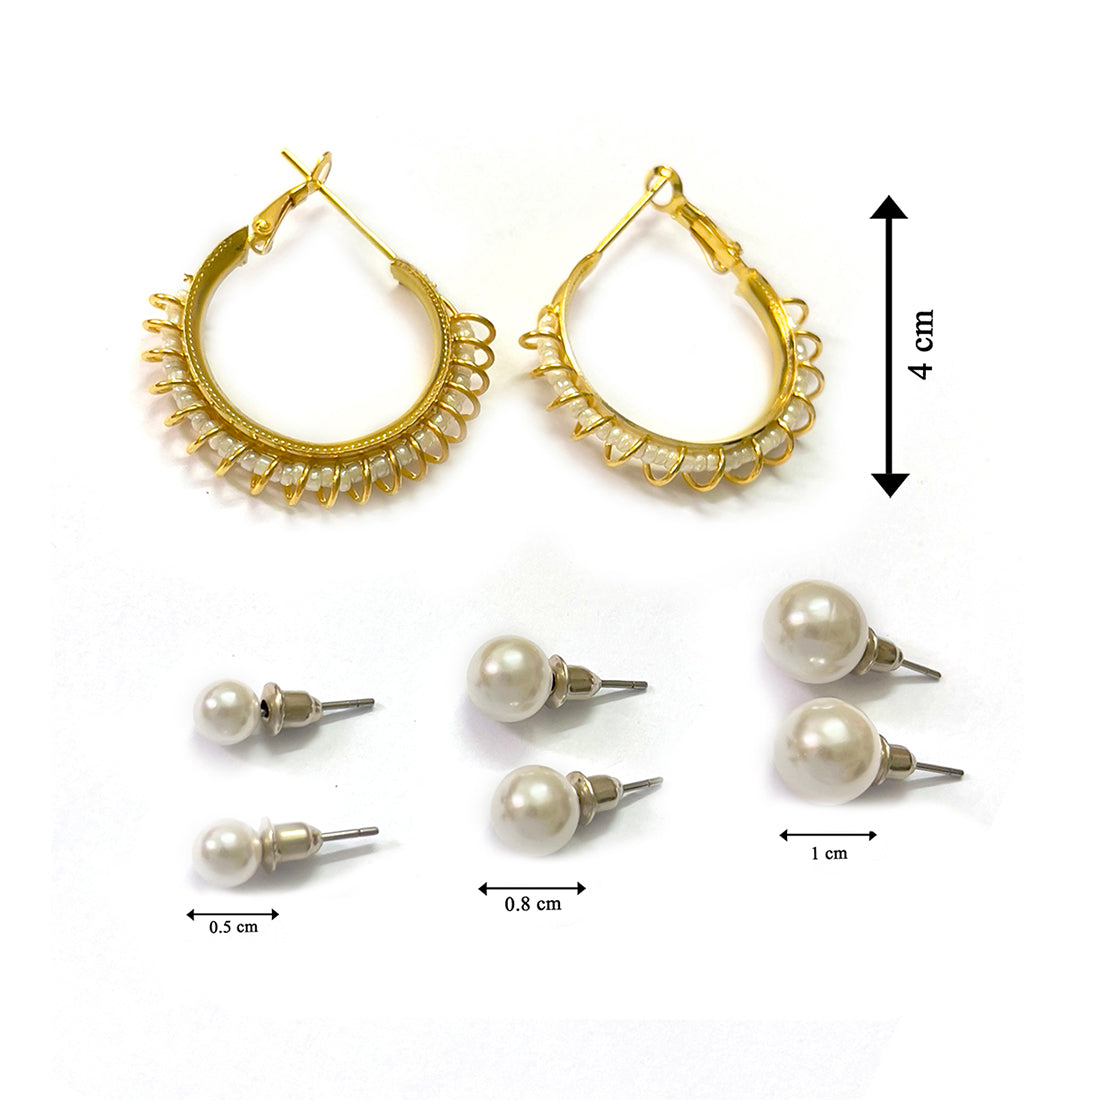 Set Of 4 White Pearl Studs In Different Sizes & Gold-Toned Wire Wrapped Hoop Earrings